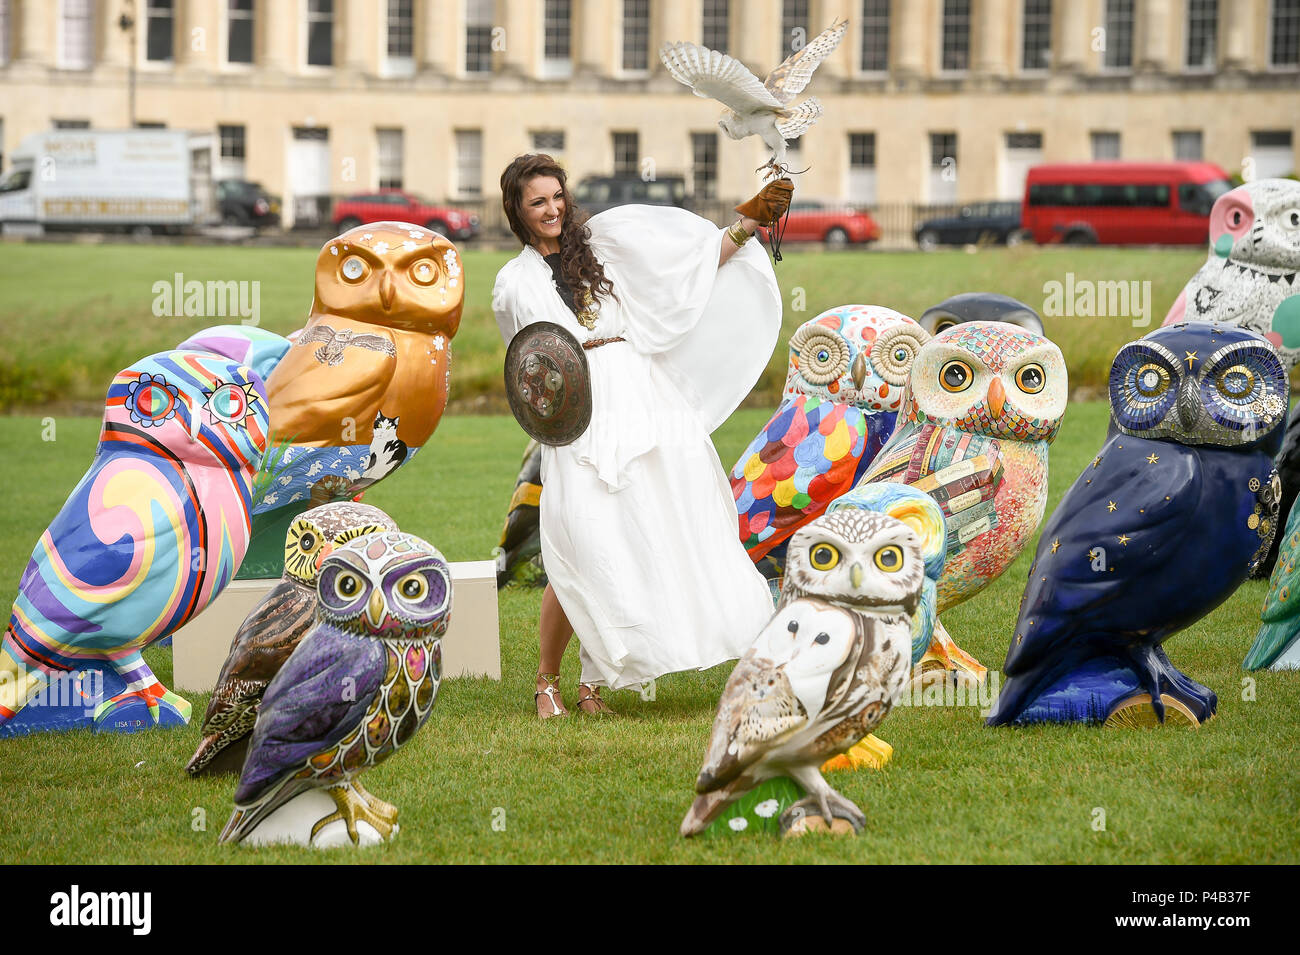 An owls sits on the hand of a woman dressed as the Roman Goddess Minerva, often referred to as the 'owl of Athena' or the 'owl of Minerva', as she stands with some of the Minerva's Owls of Bath sculptures, an art trail that takes place around the city for three months starting June 25, 2018. Stock Photo